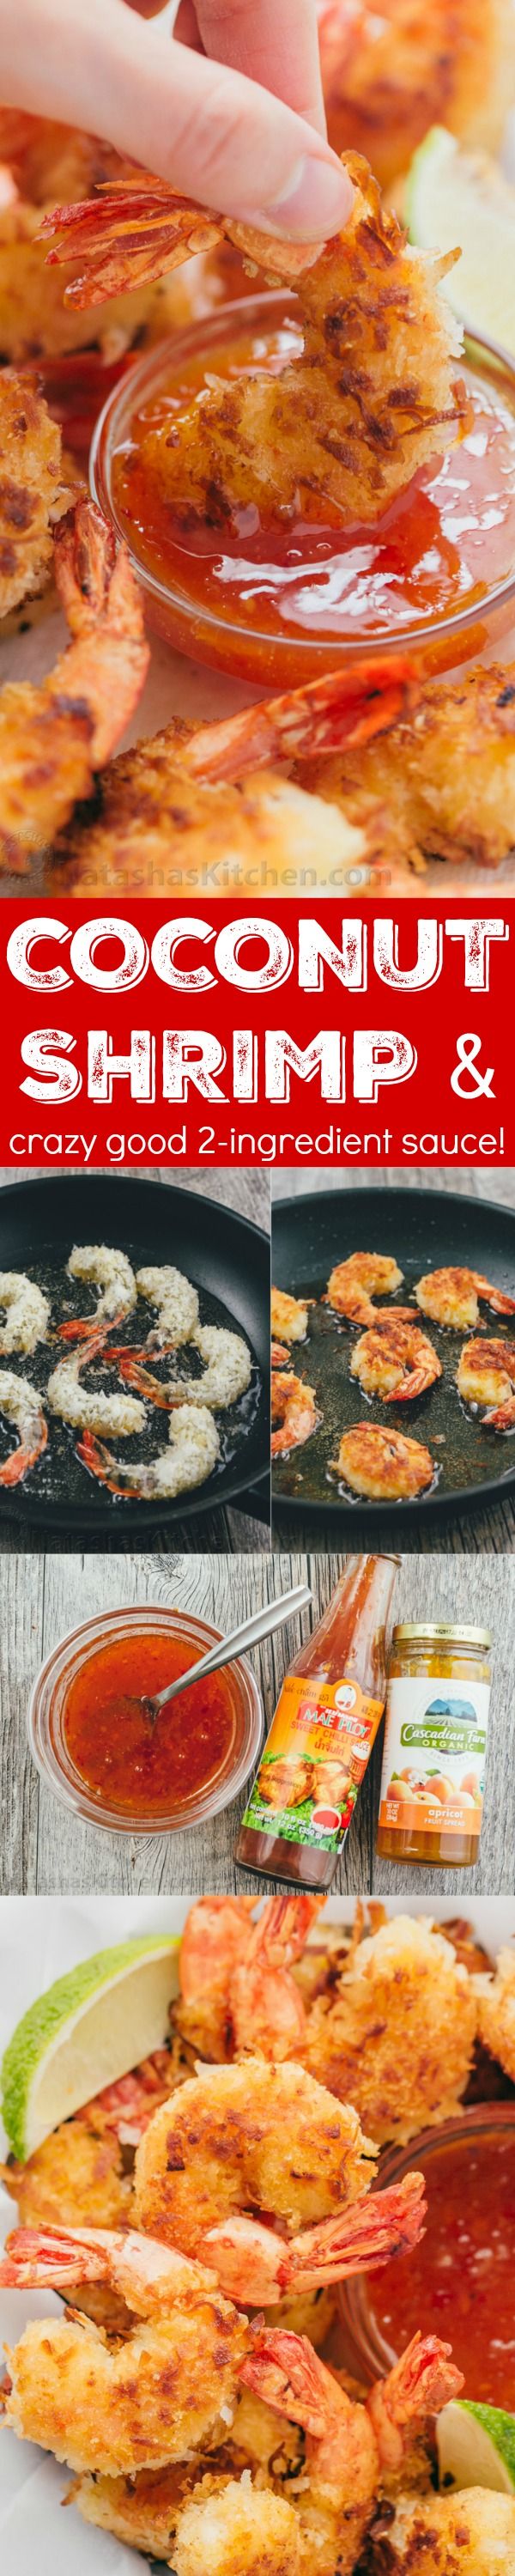 Coconut Shrimp with 2-Ingredient Dipping Sauce